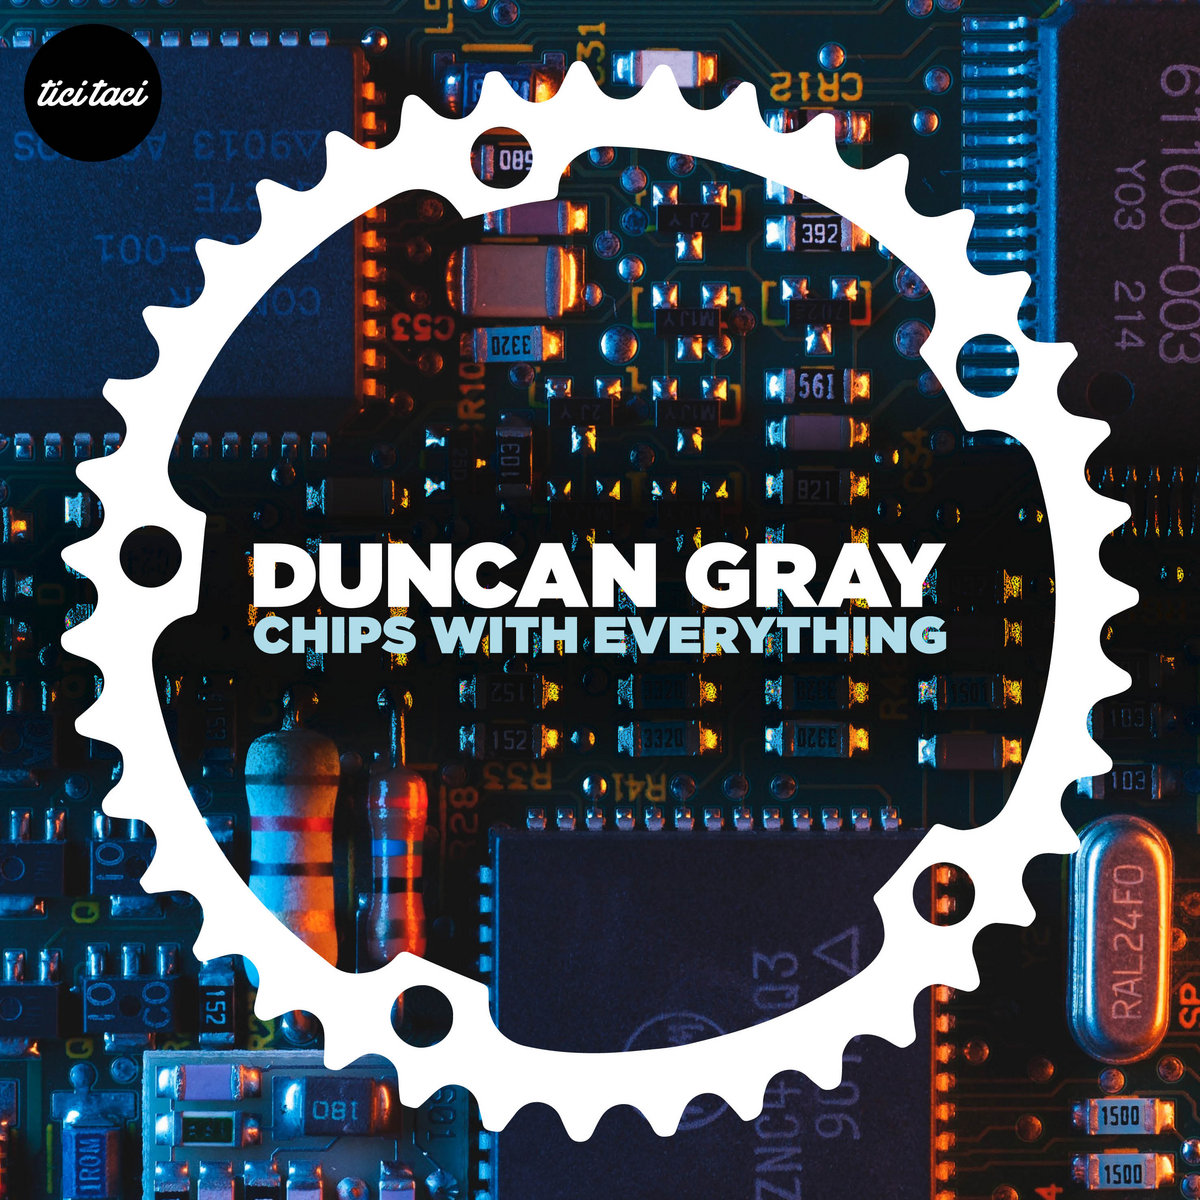 Duncan Gray - Chips with Everything [2020-05-01] (tici taci)